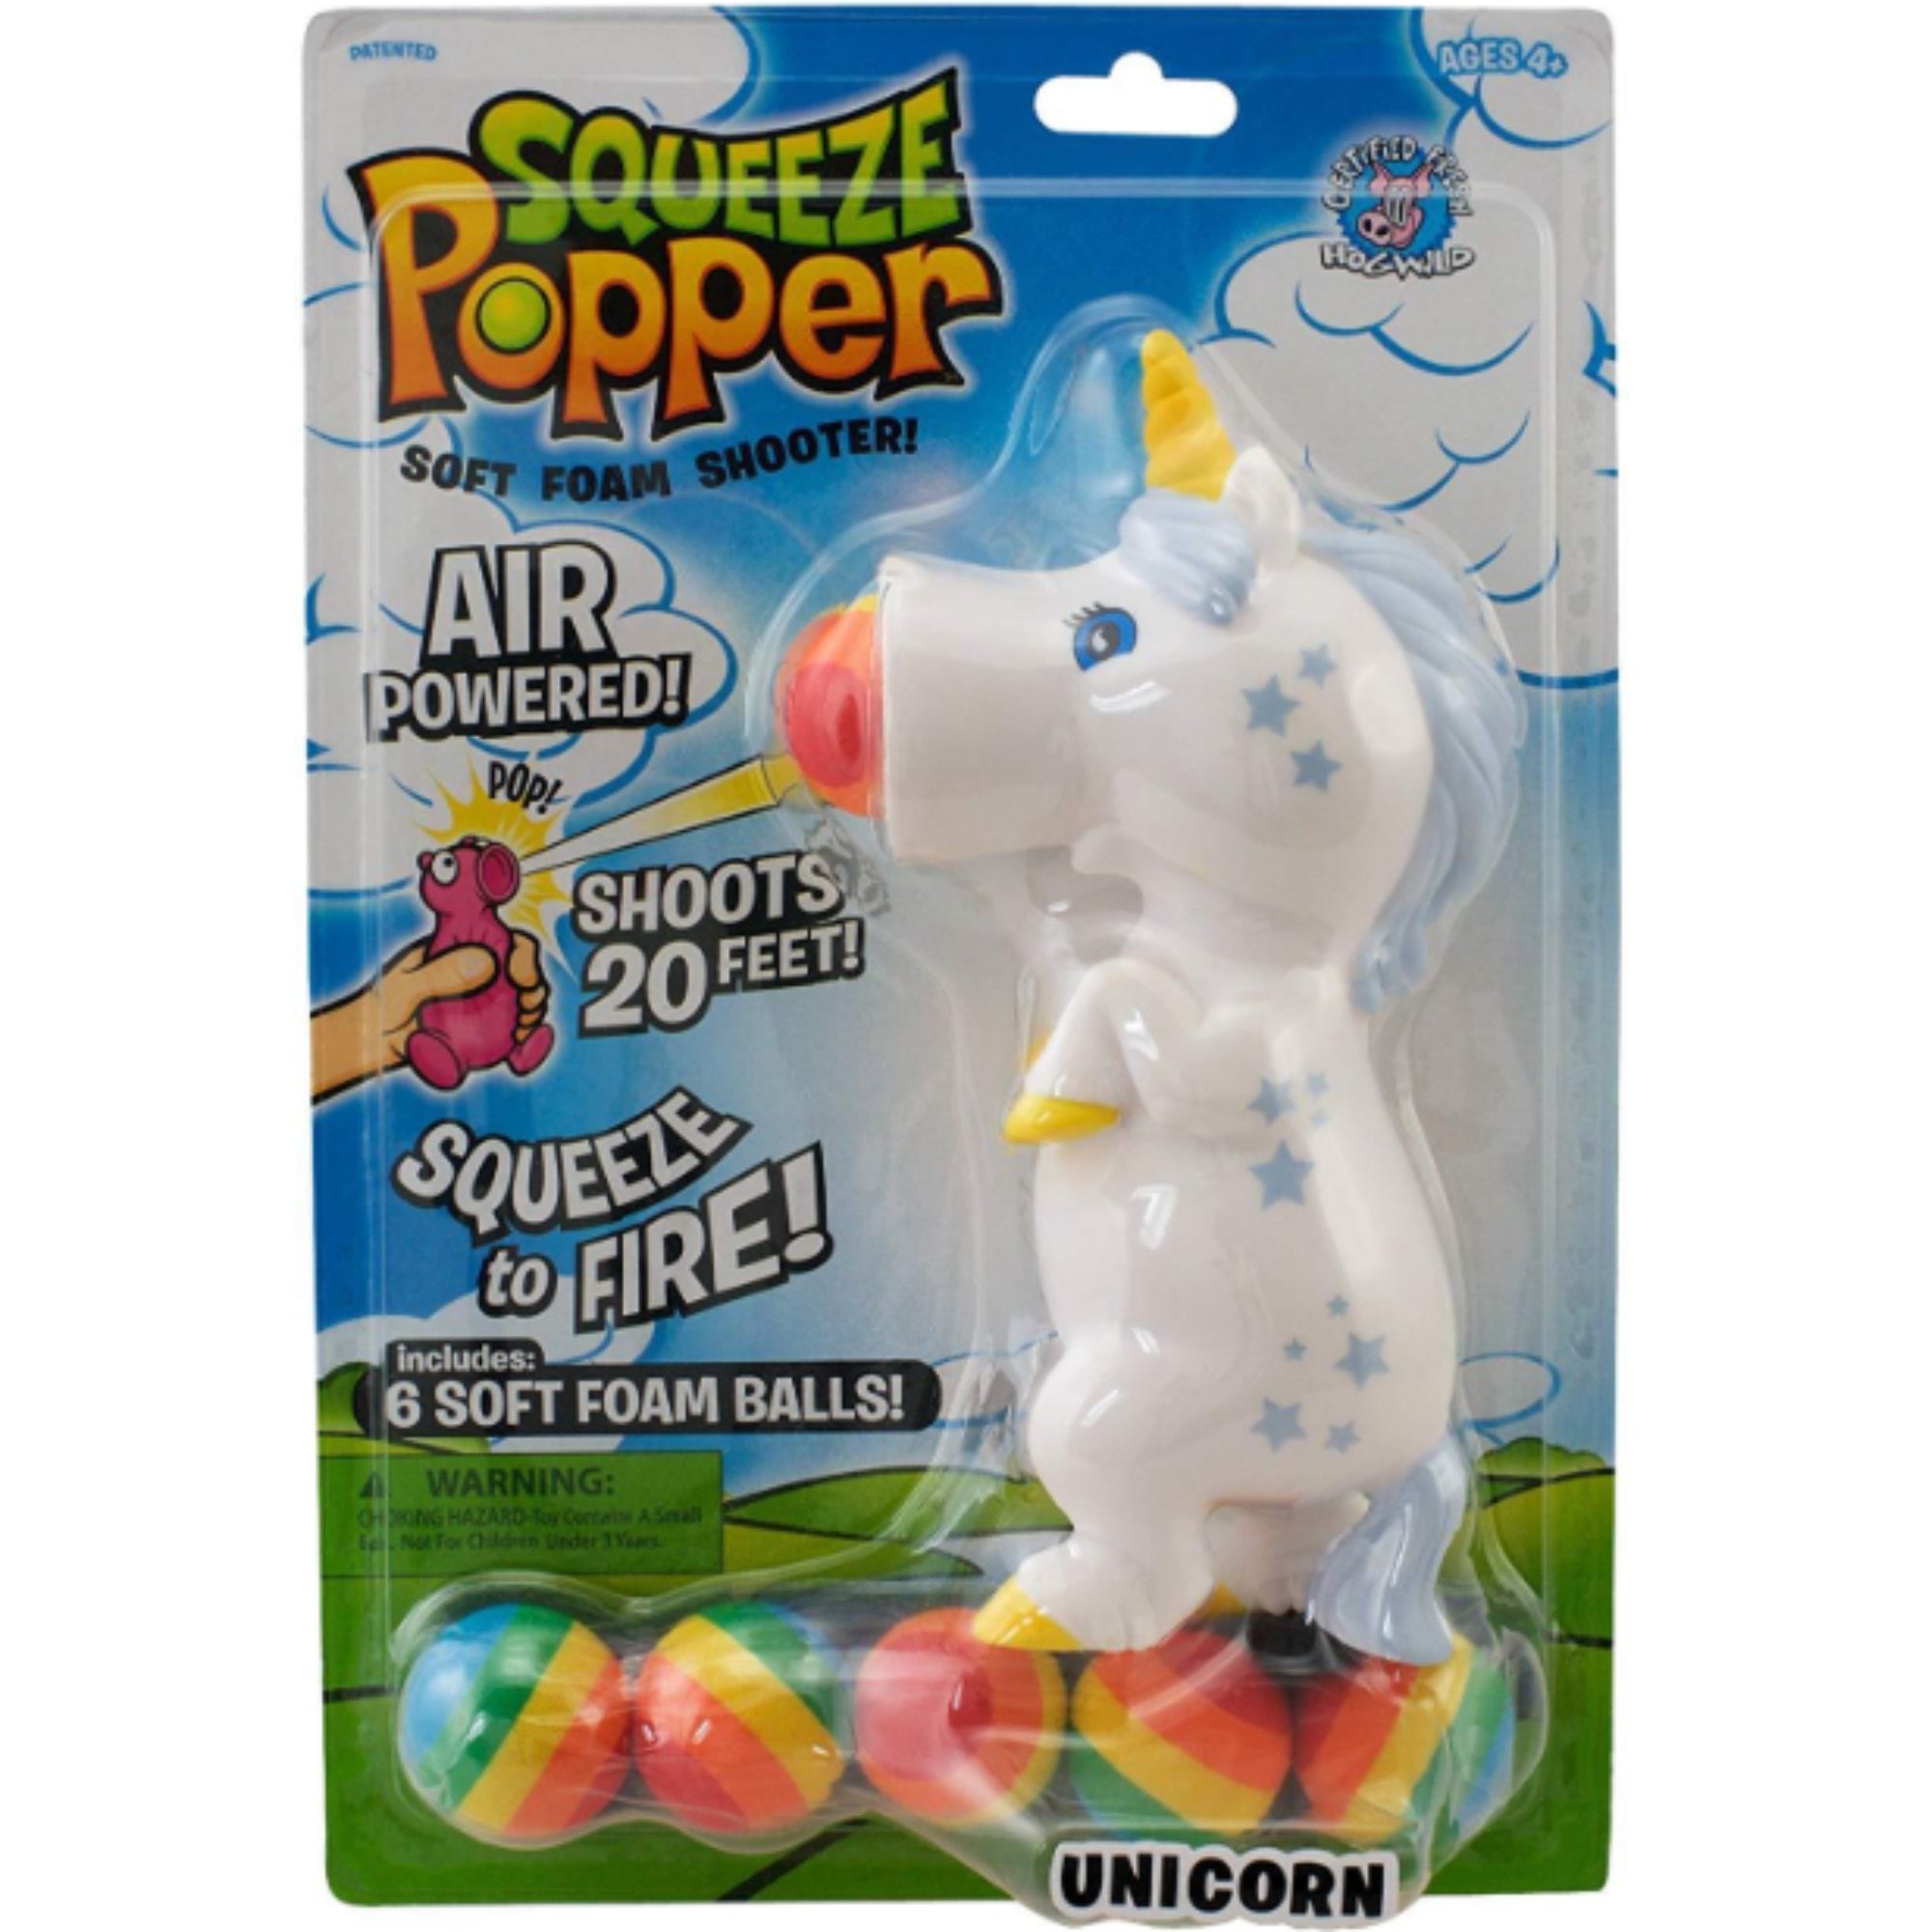 squeeze popper white unicorn package